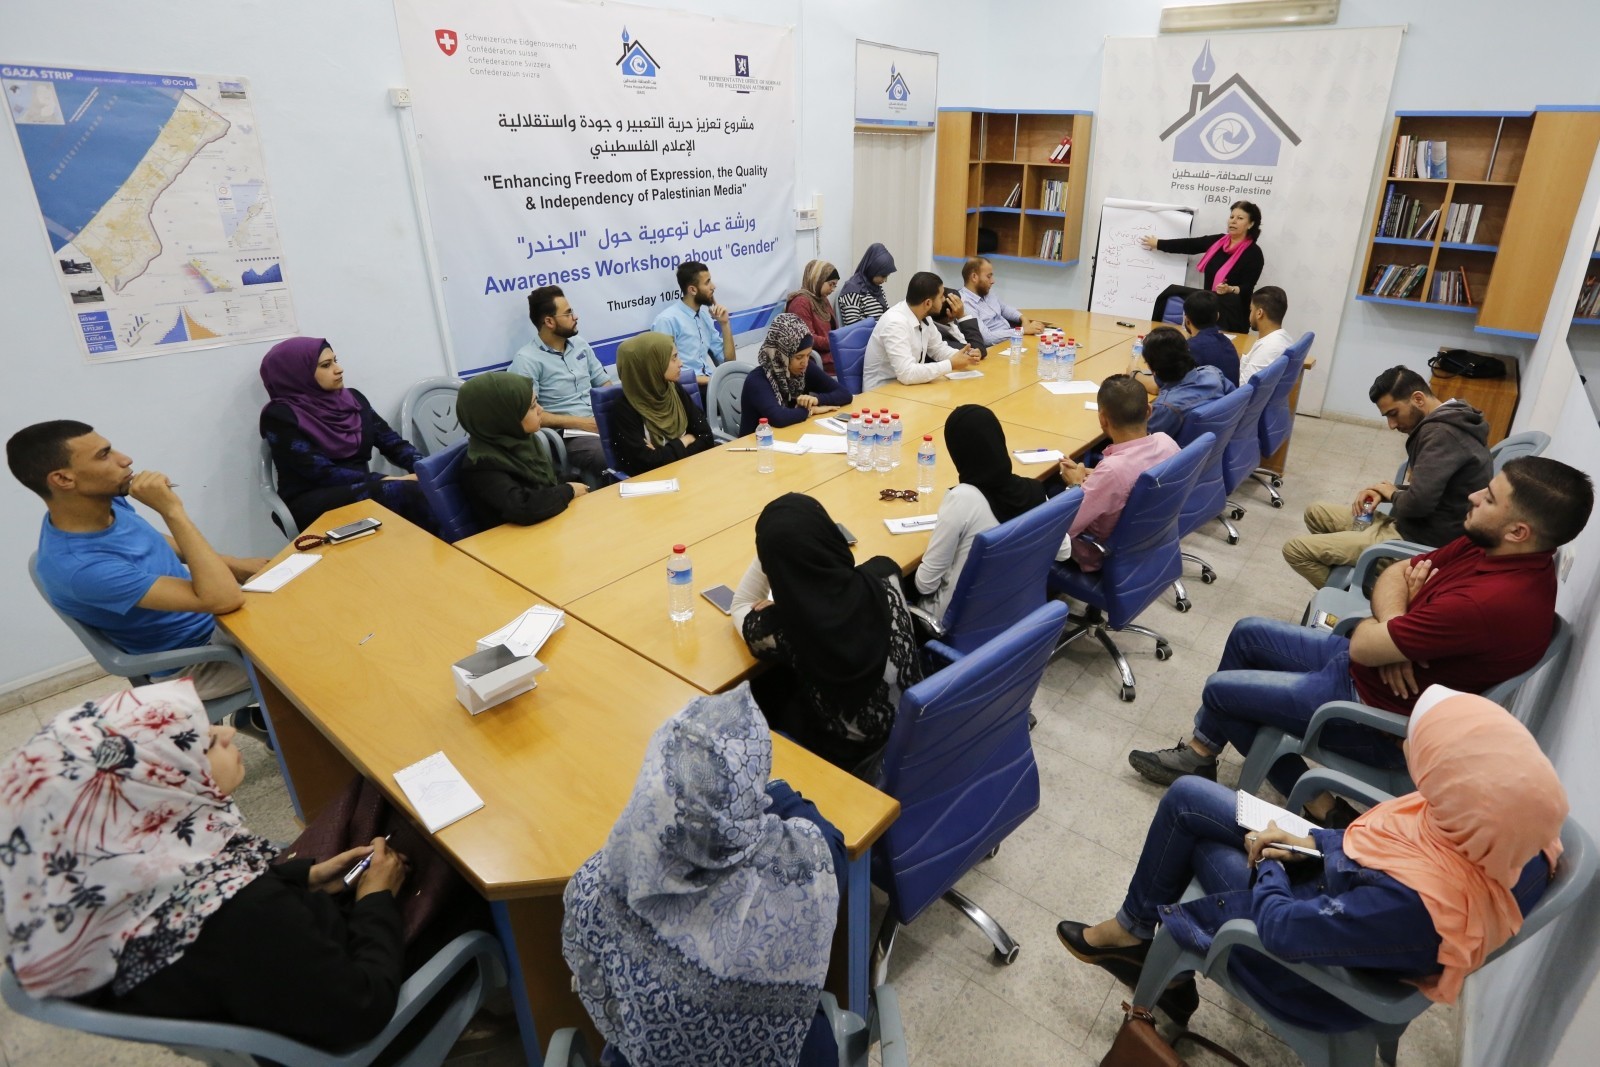 Press House conducts a Workshop about “Gender” and its Sensitivity